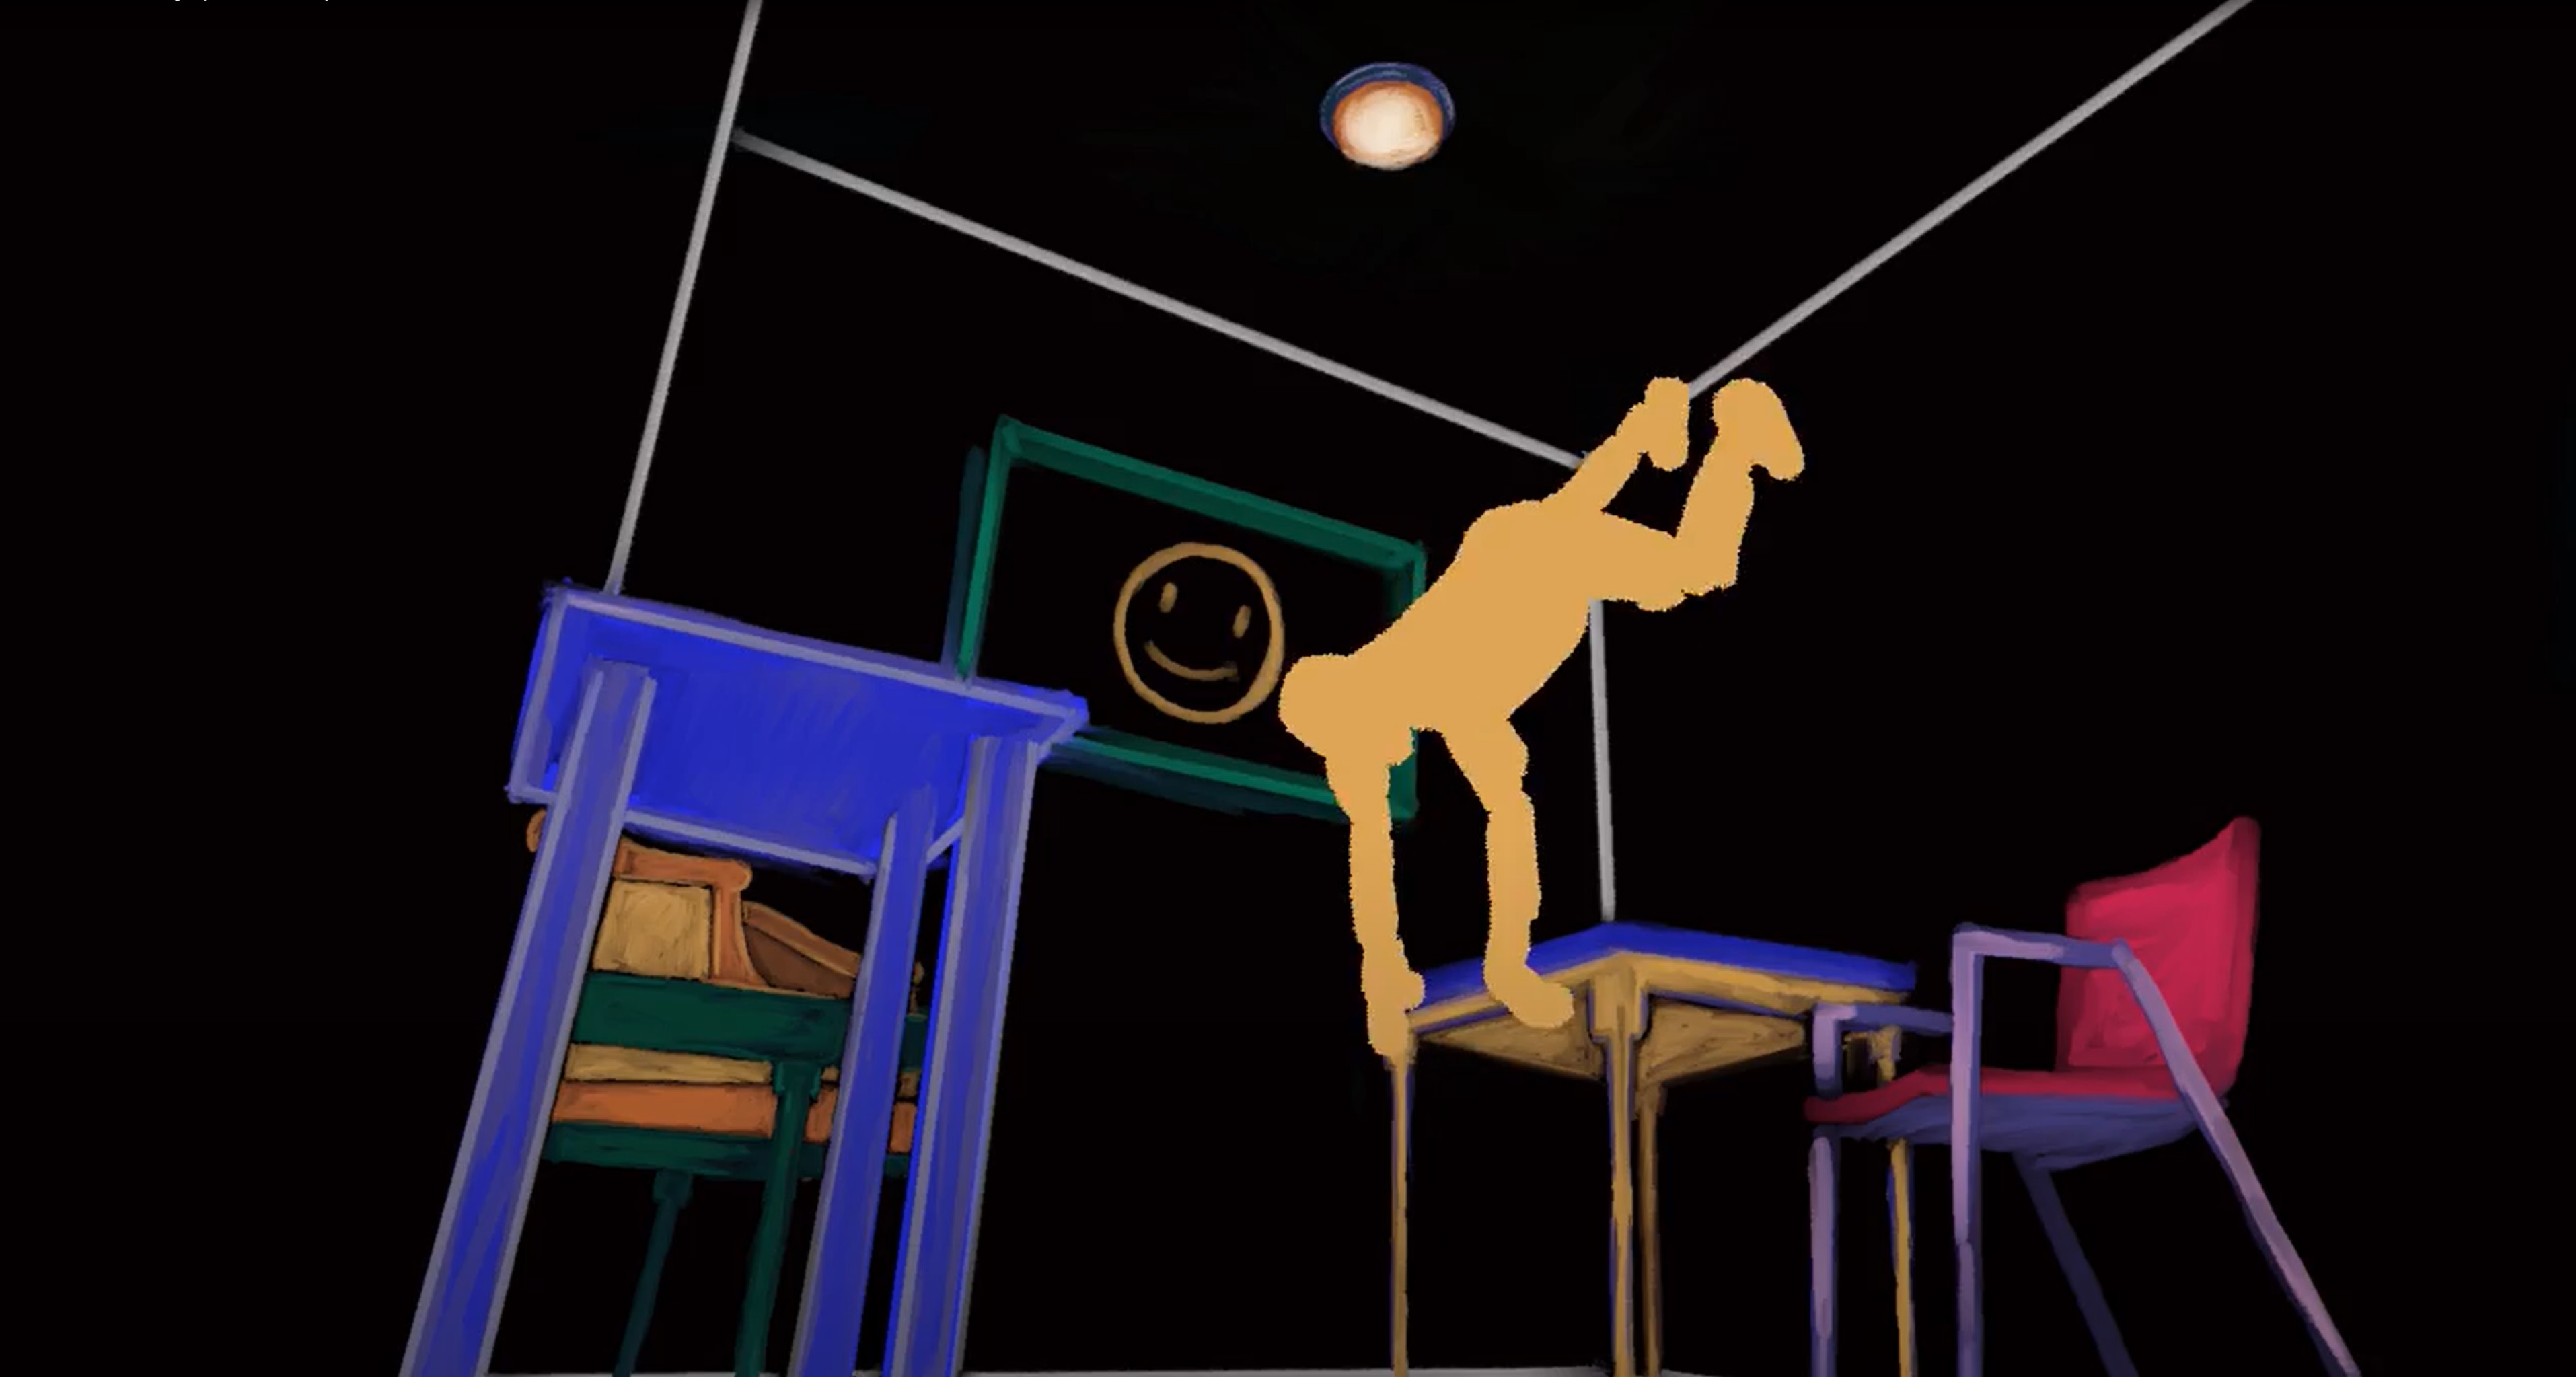 blotchy figures of furniture and a person who is upside down, the shapes are solid colors, the room is black.